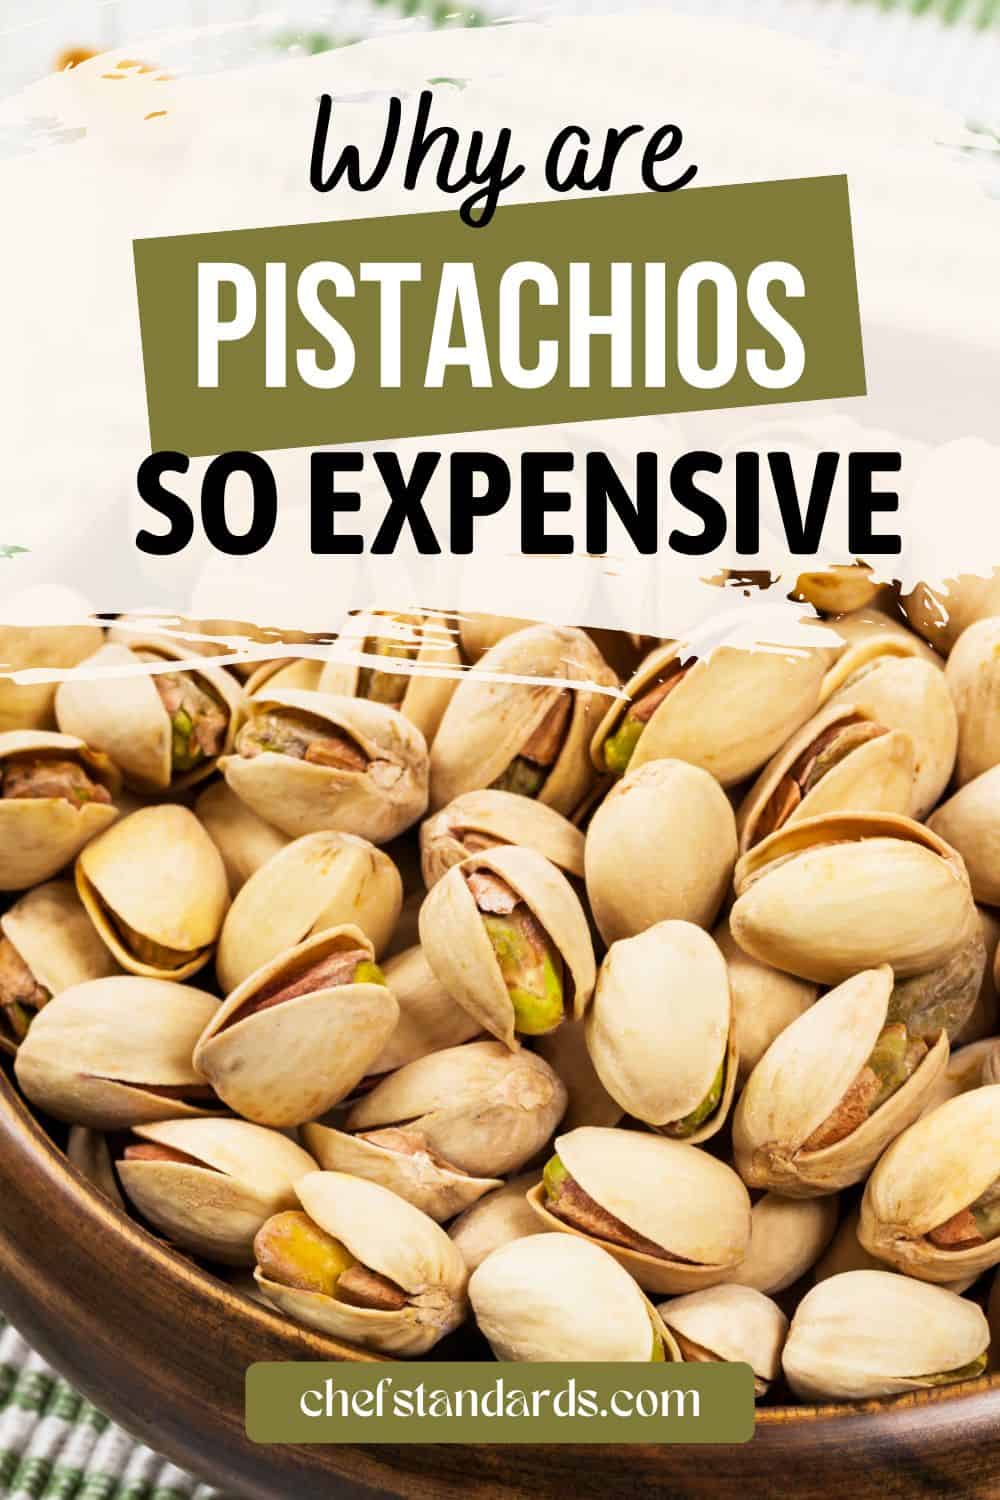 13 Interesting Reasons Why Pistachios Are So Expensive
